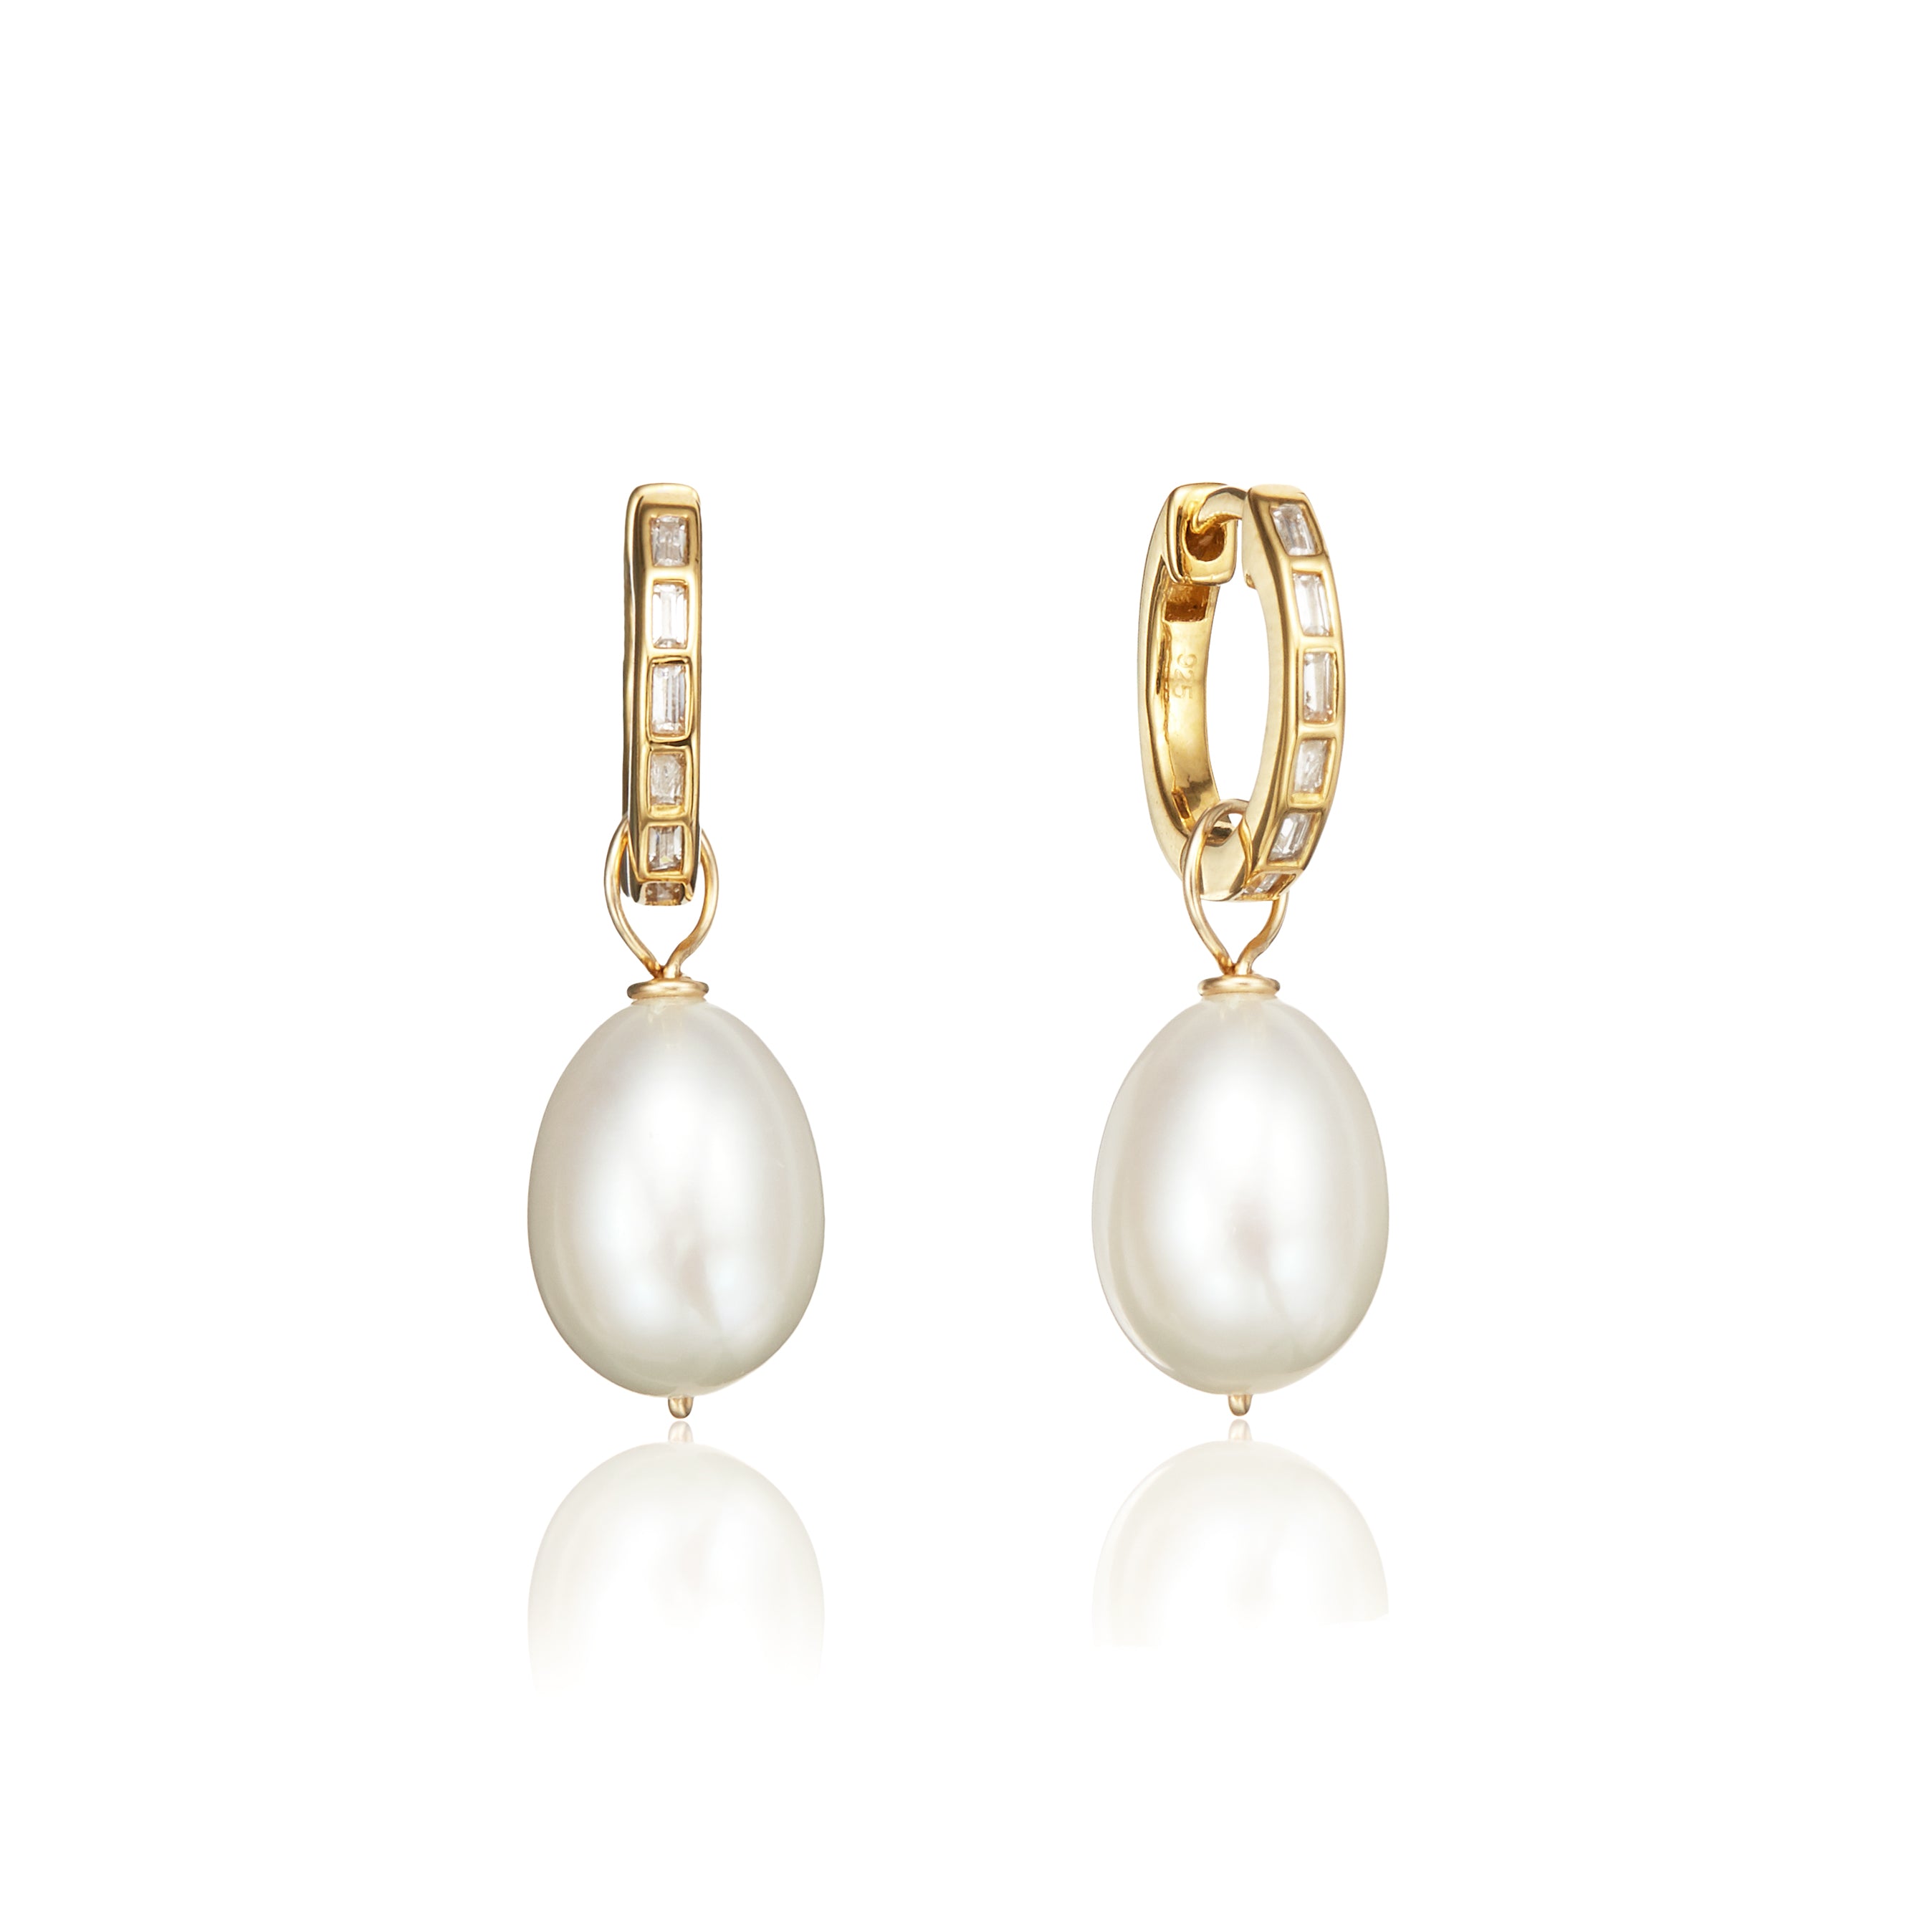 Gold diamond style baguette pearl drop hoop earrings on a white background